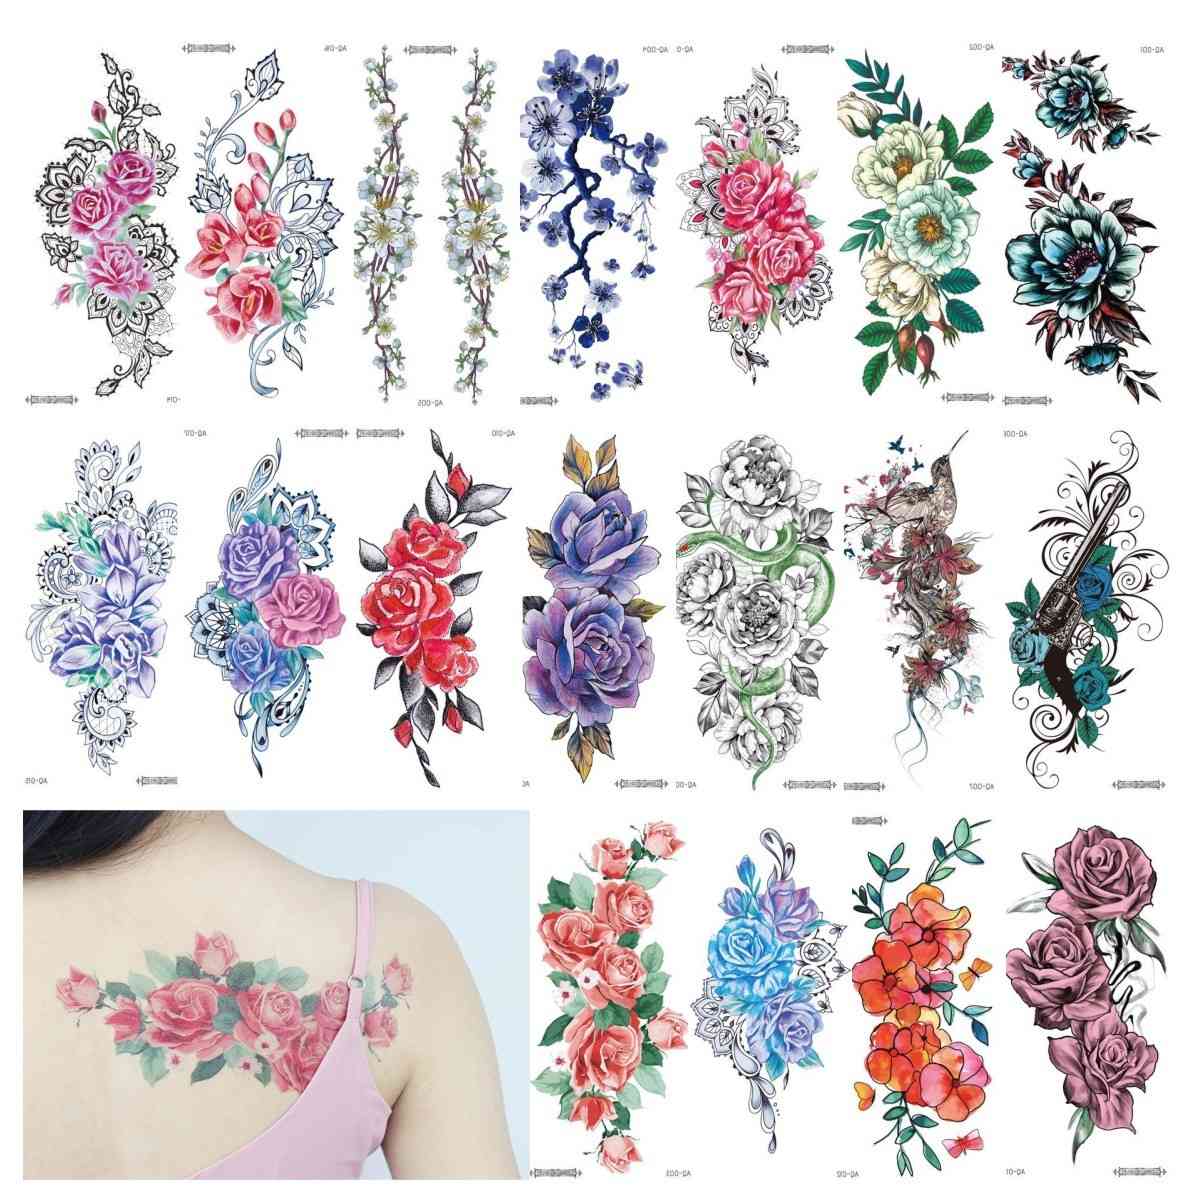 

Watercolor Flowers Temporary Tattoos Stickers Colorful Roses Full Arm Art Big Large Fake Tattoo Sticker Women Body Paint